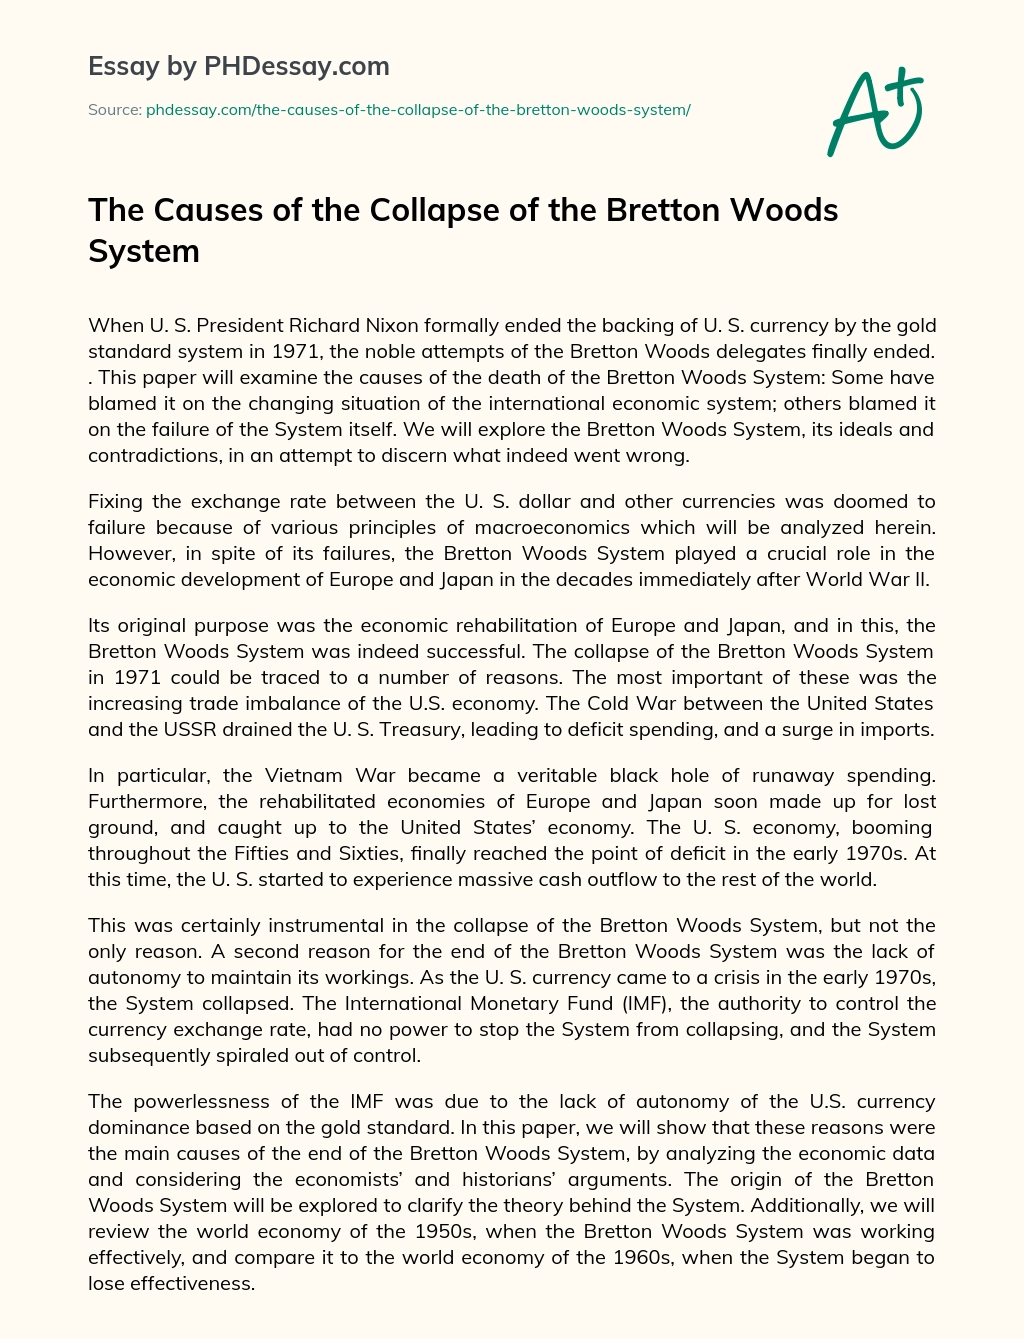 The Causes of the Collapse of the Bretton Woods System essay